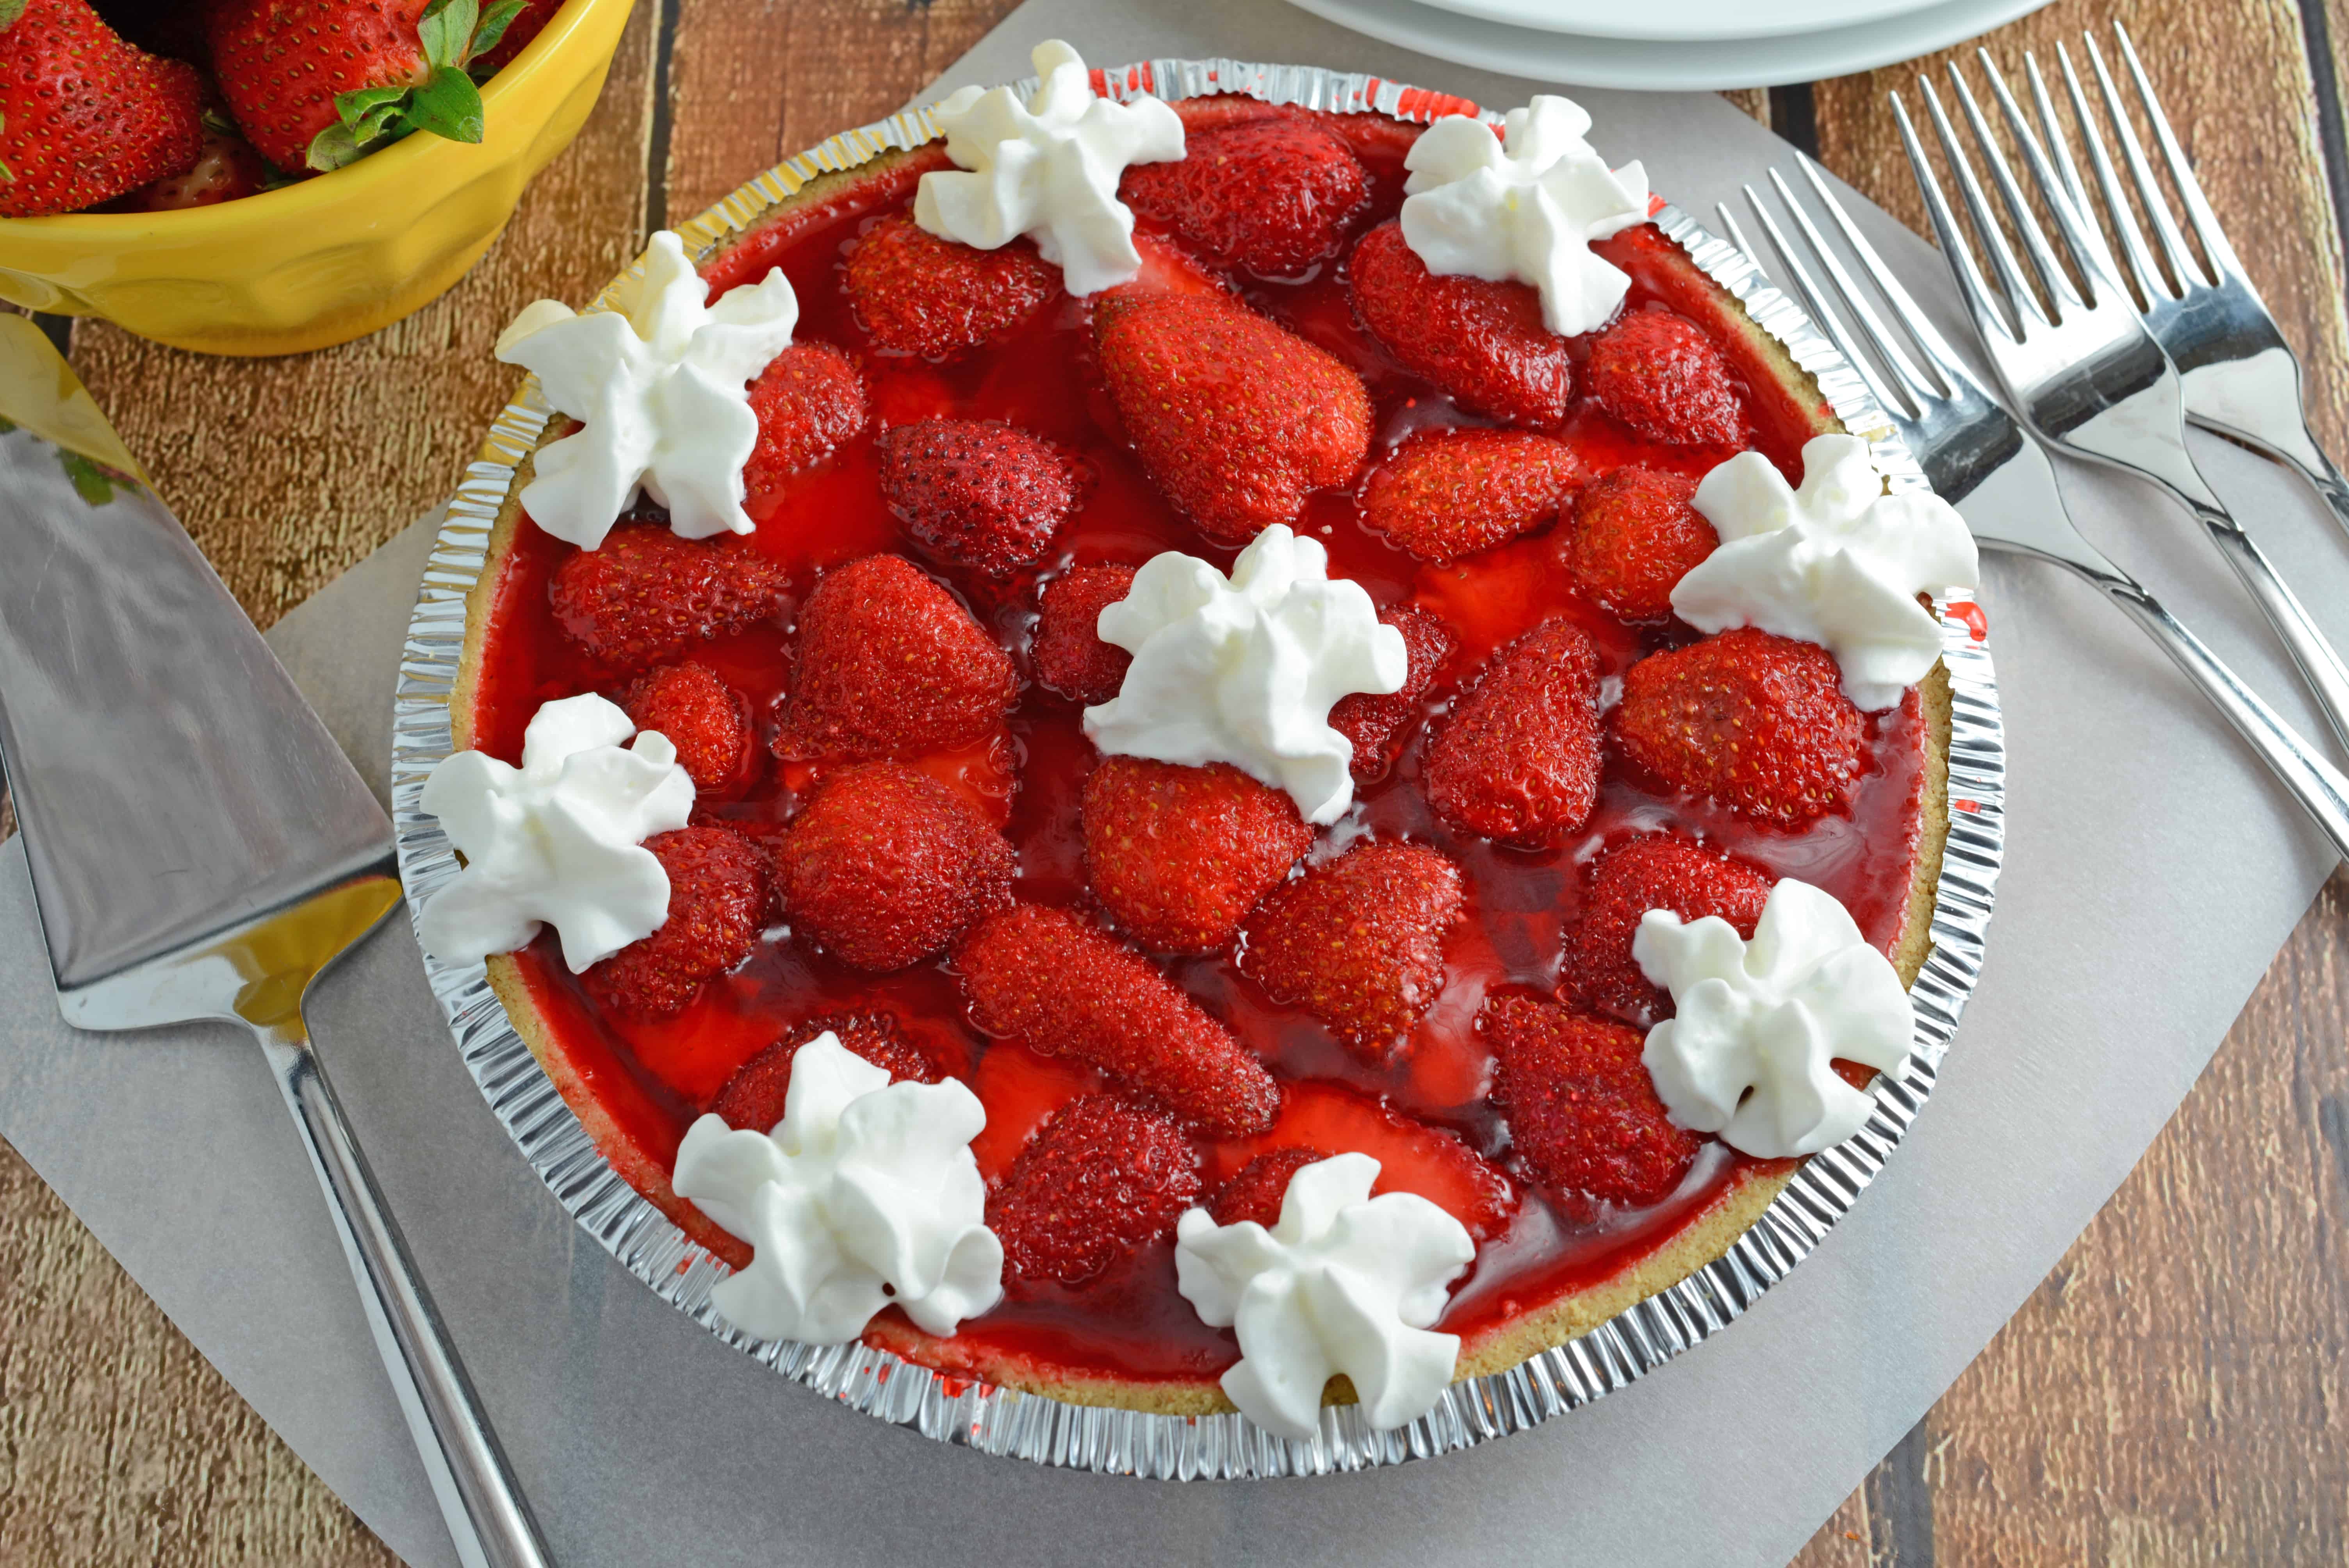 No-Bake Strawberry Cream Cheese Pie- A no-bake pie made with graham cracker crust, a layer of sweet cream cheese, loads of fresh strawberries and a homemade strawberry jelly. All ready in less than 20 minutes! www.savoryexperiments.com